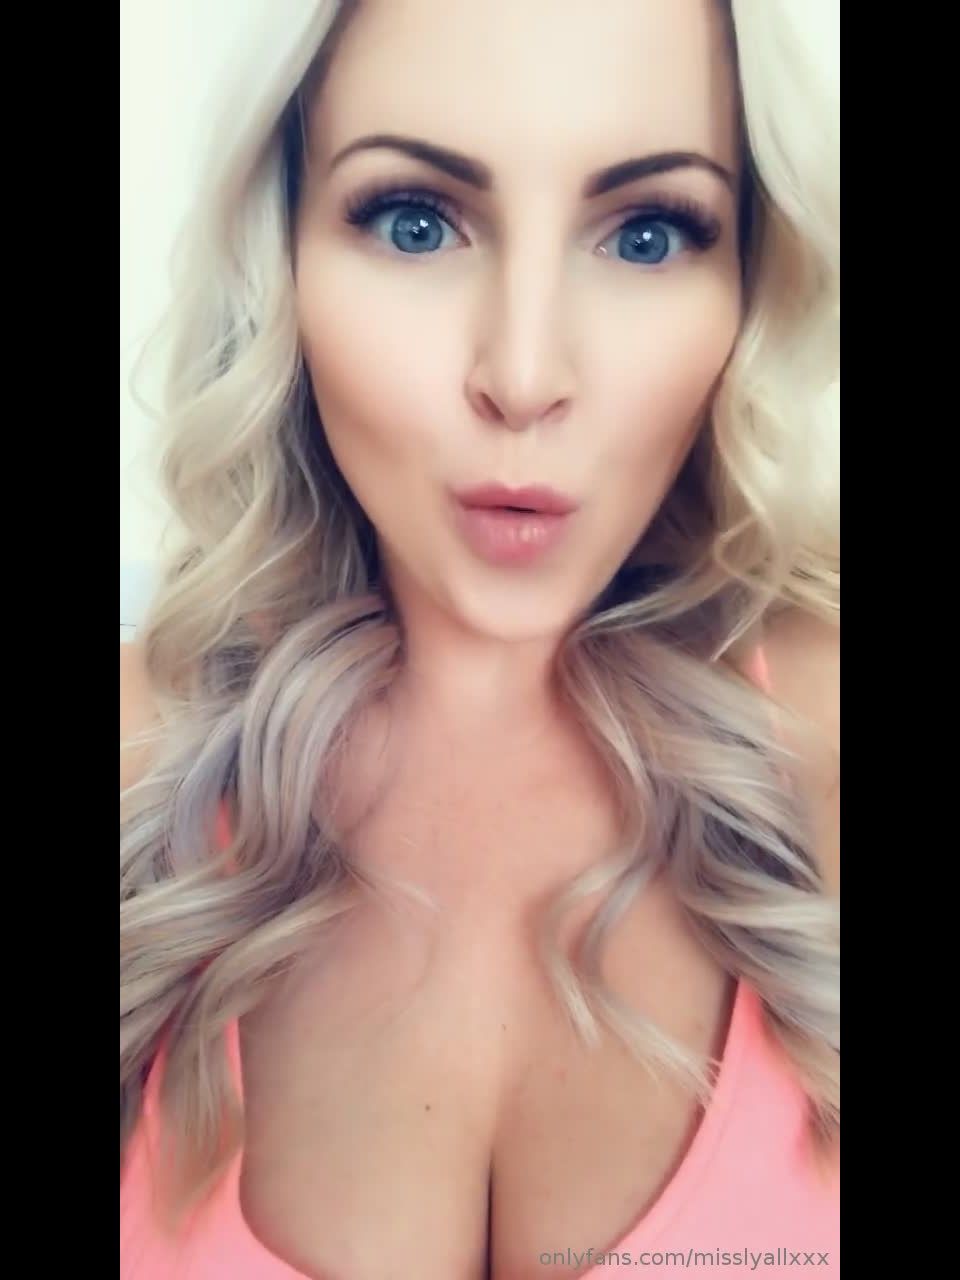 GeorgieLyallXXX Misslyallxxx - playing while the removal men are taking my stuff out lol shhhhh 24-05-2019